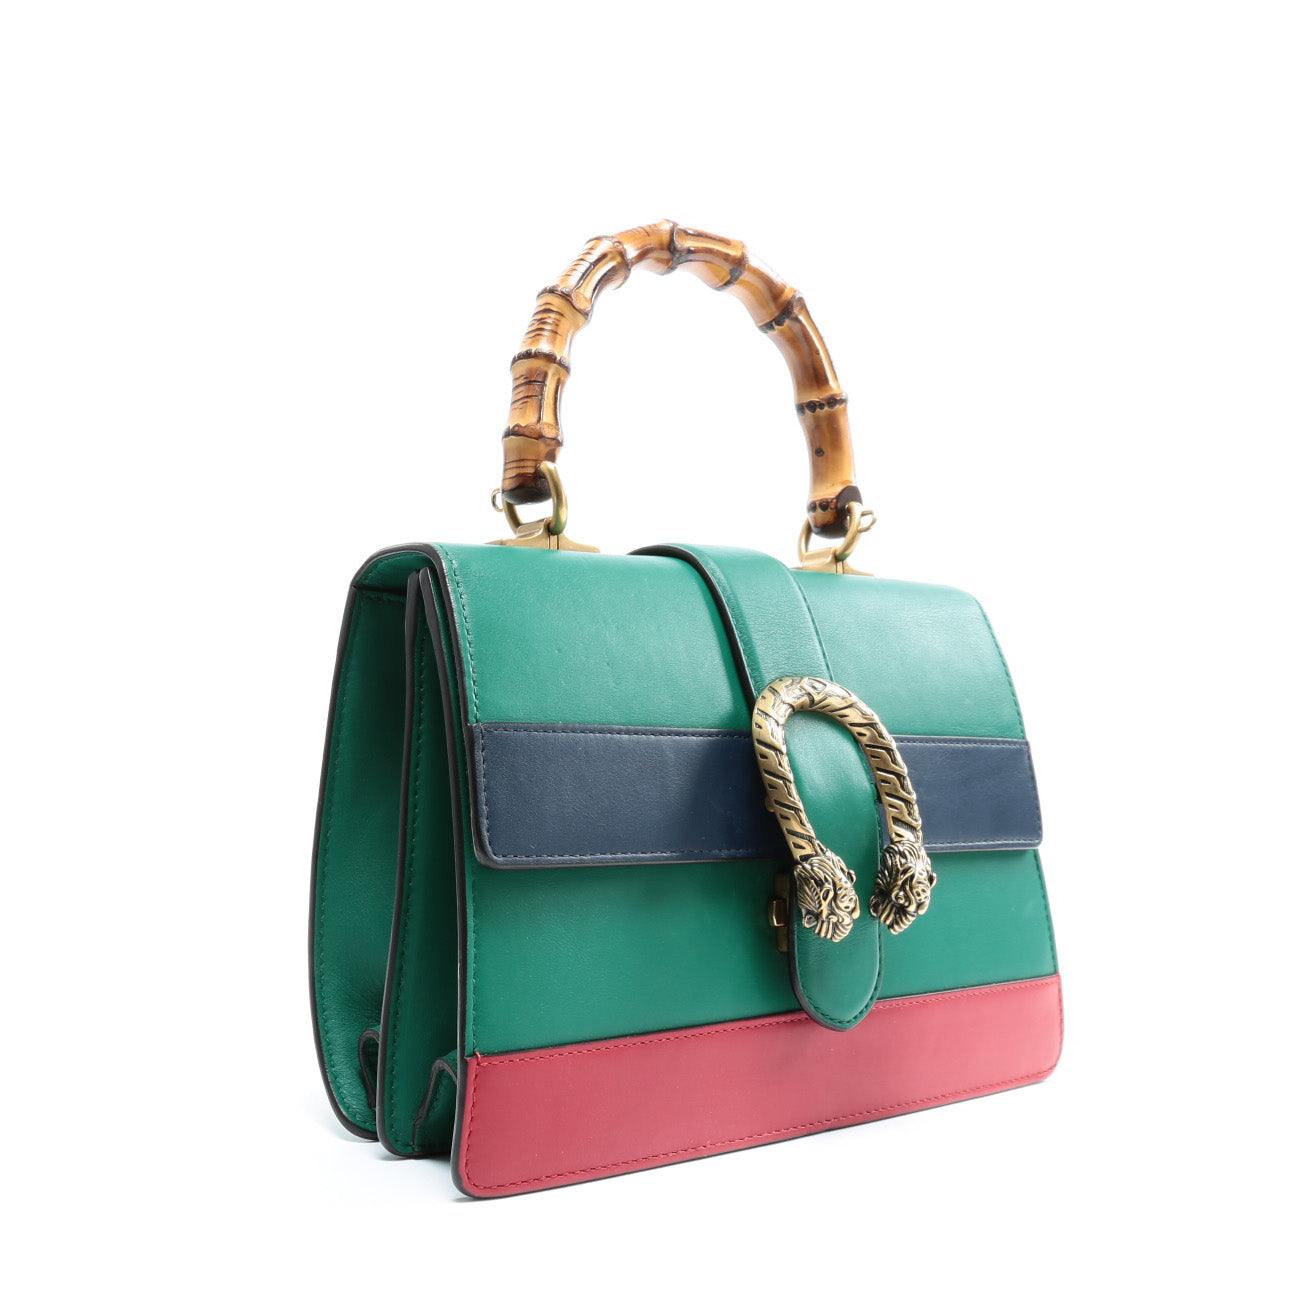 Gucci Dionysus Bamboo-handle Medium Leather Tote in Green